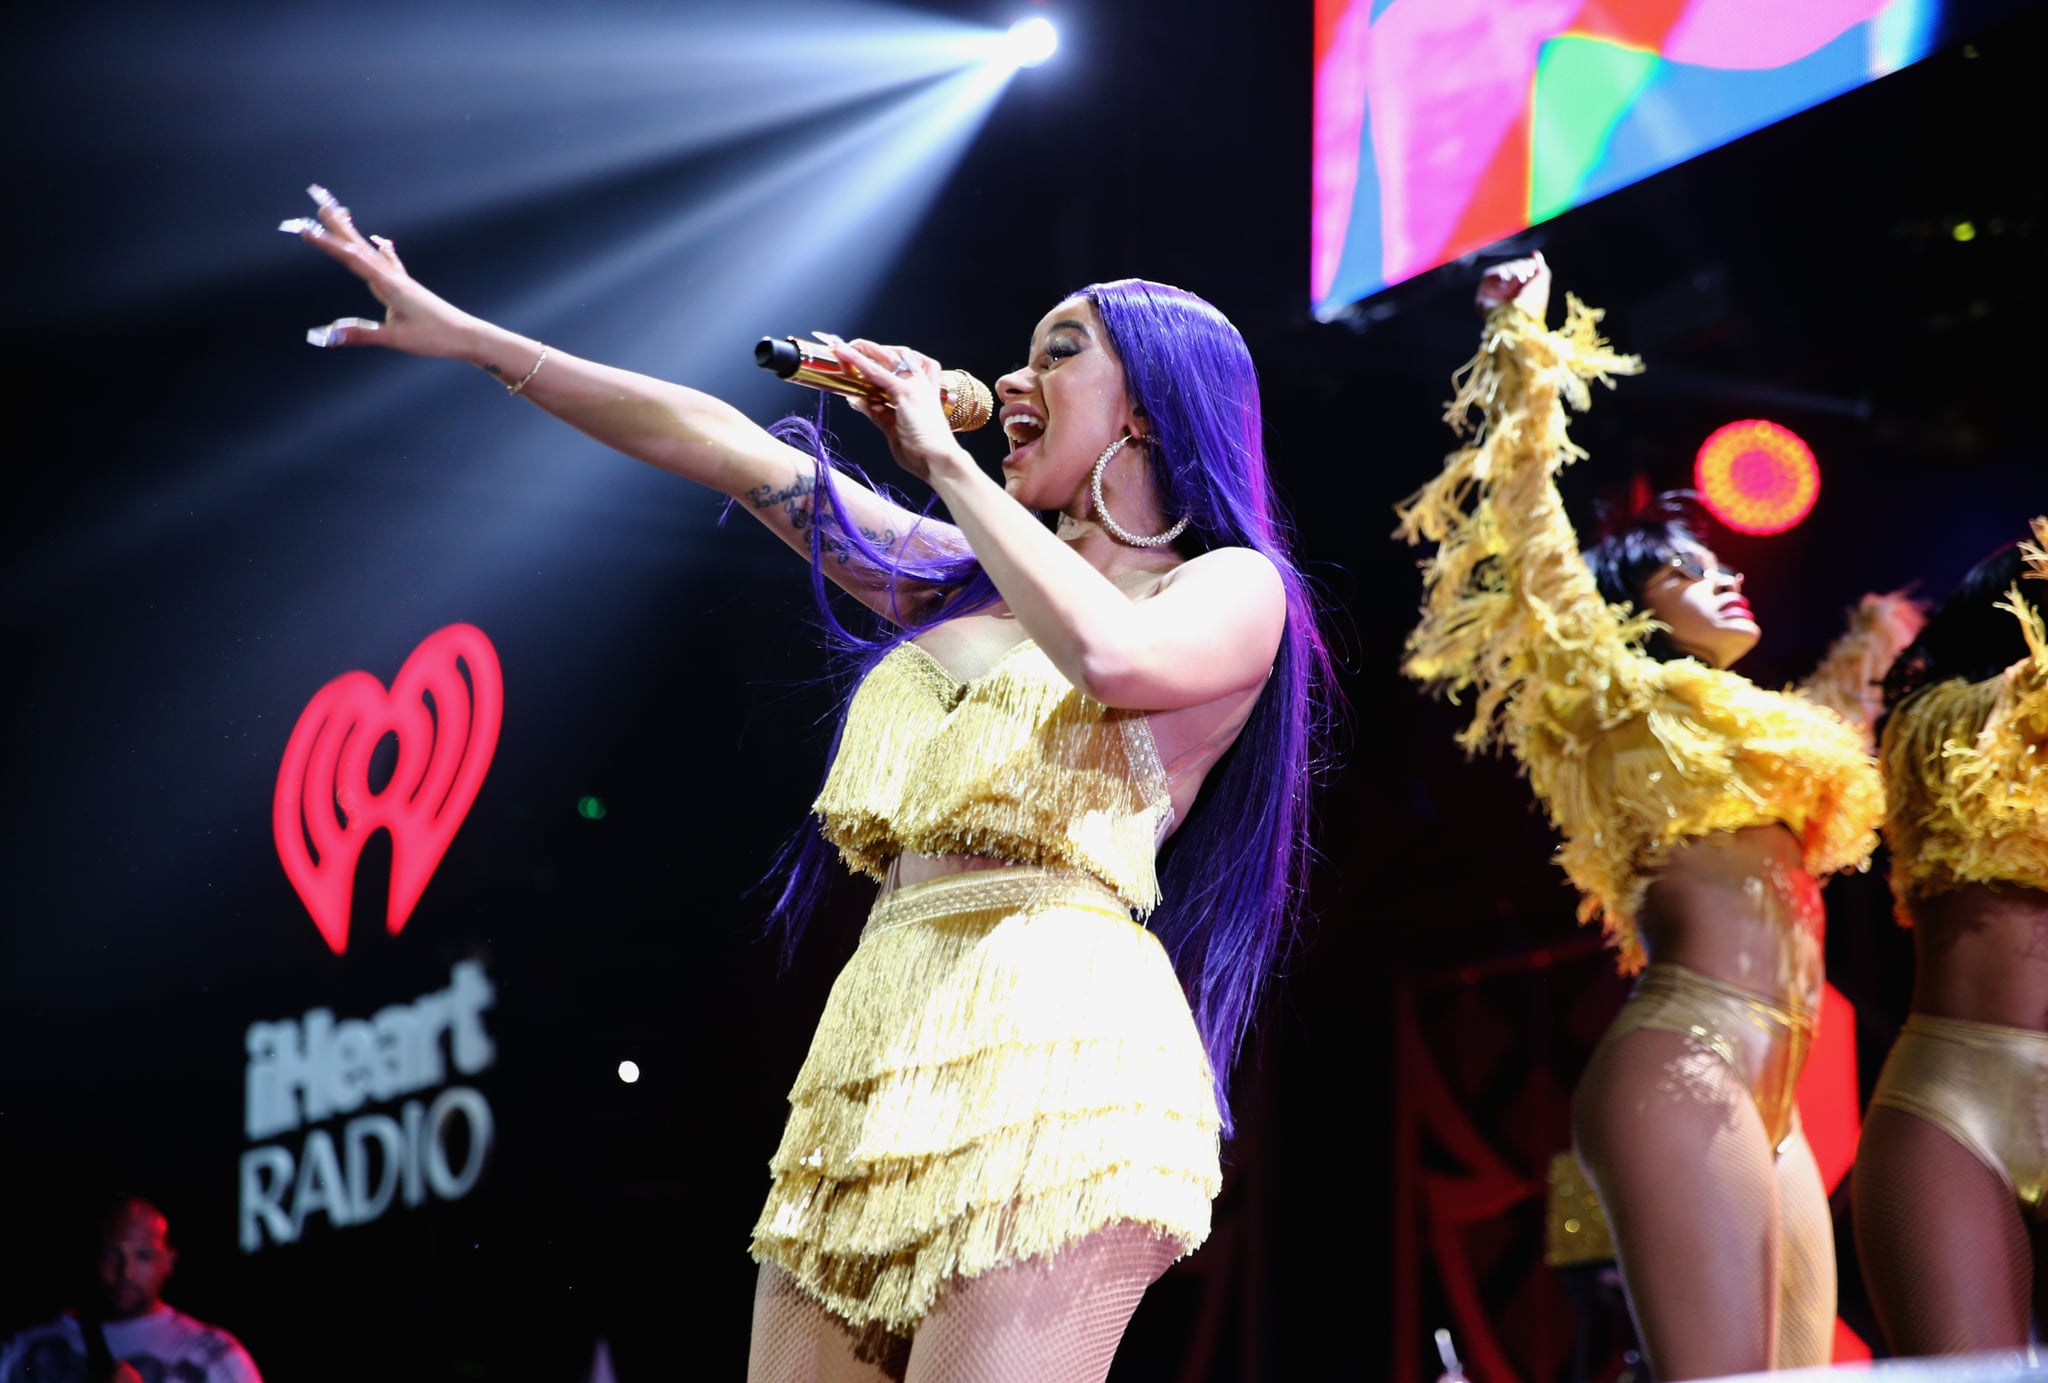 INGLEWOOD, CA - NOVEMBER 30:  Cardi B performs onstage during 102.7 KIIS FM's Jingle Ball 2018 Presented by Capital One at The Forum on November 30, 2018 in Inglewood, California.  (Photo by Rich Fury/Getty Images for iHeartMedia)